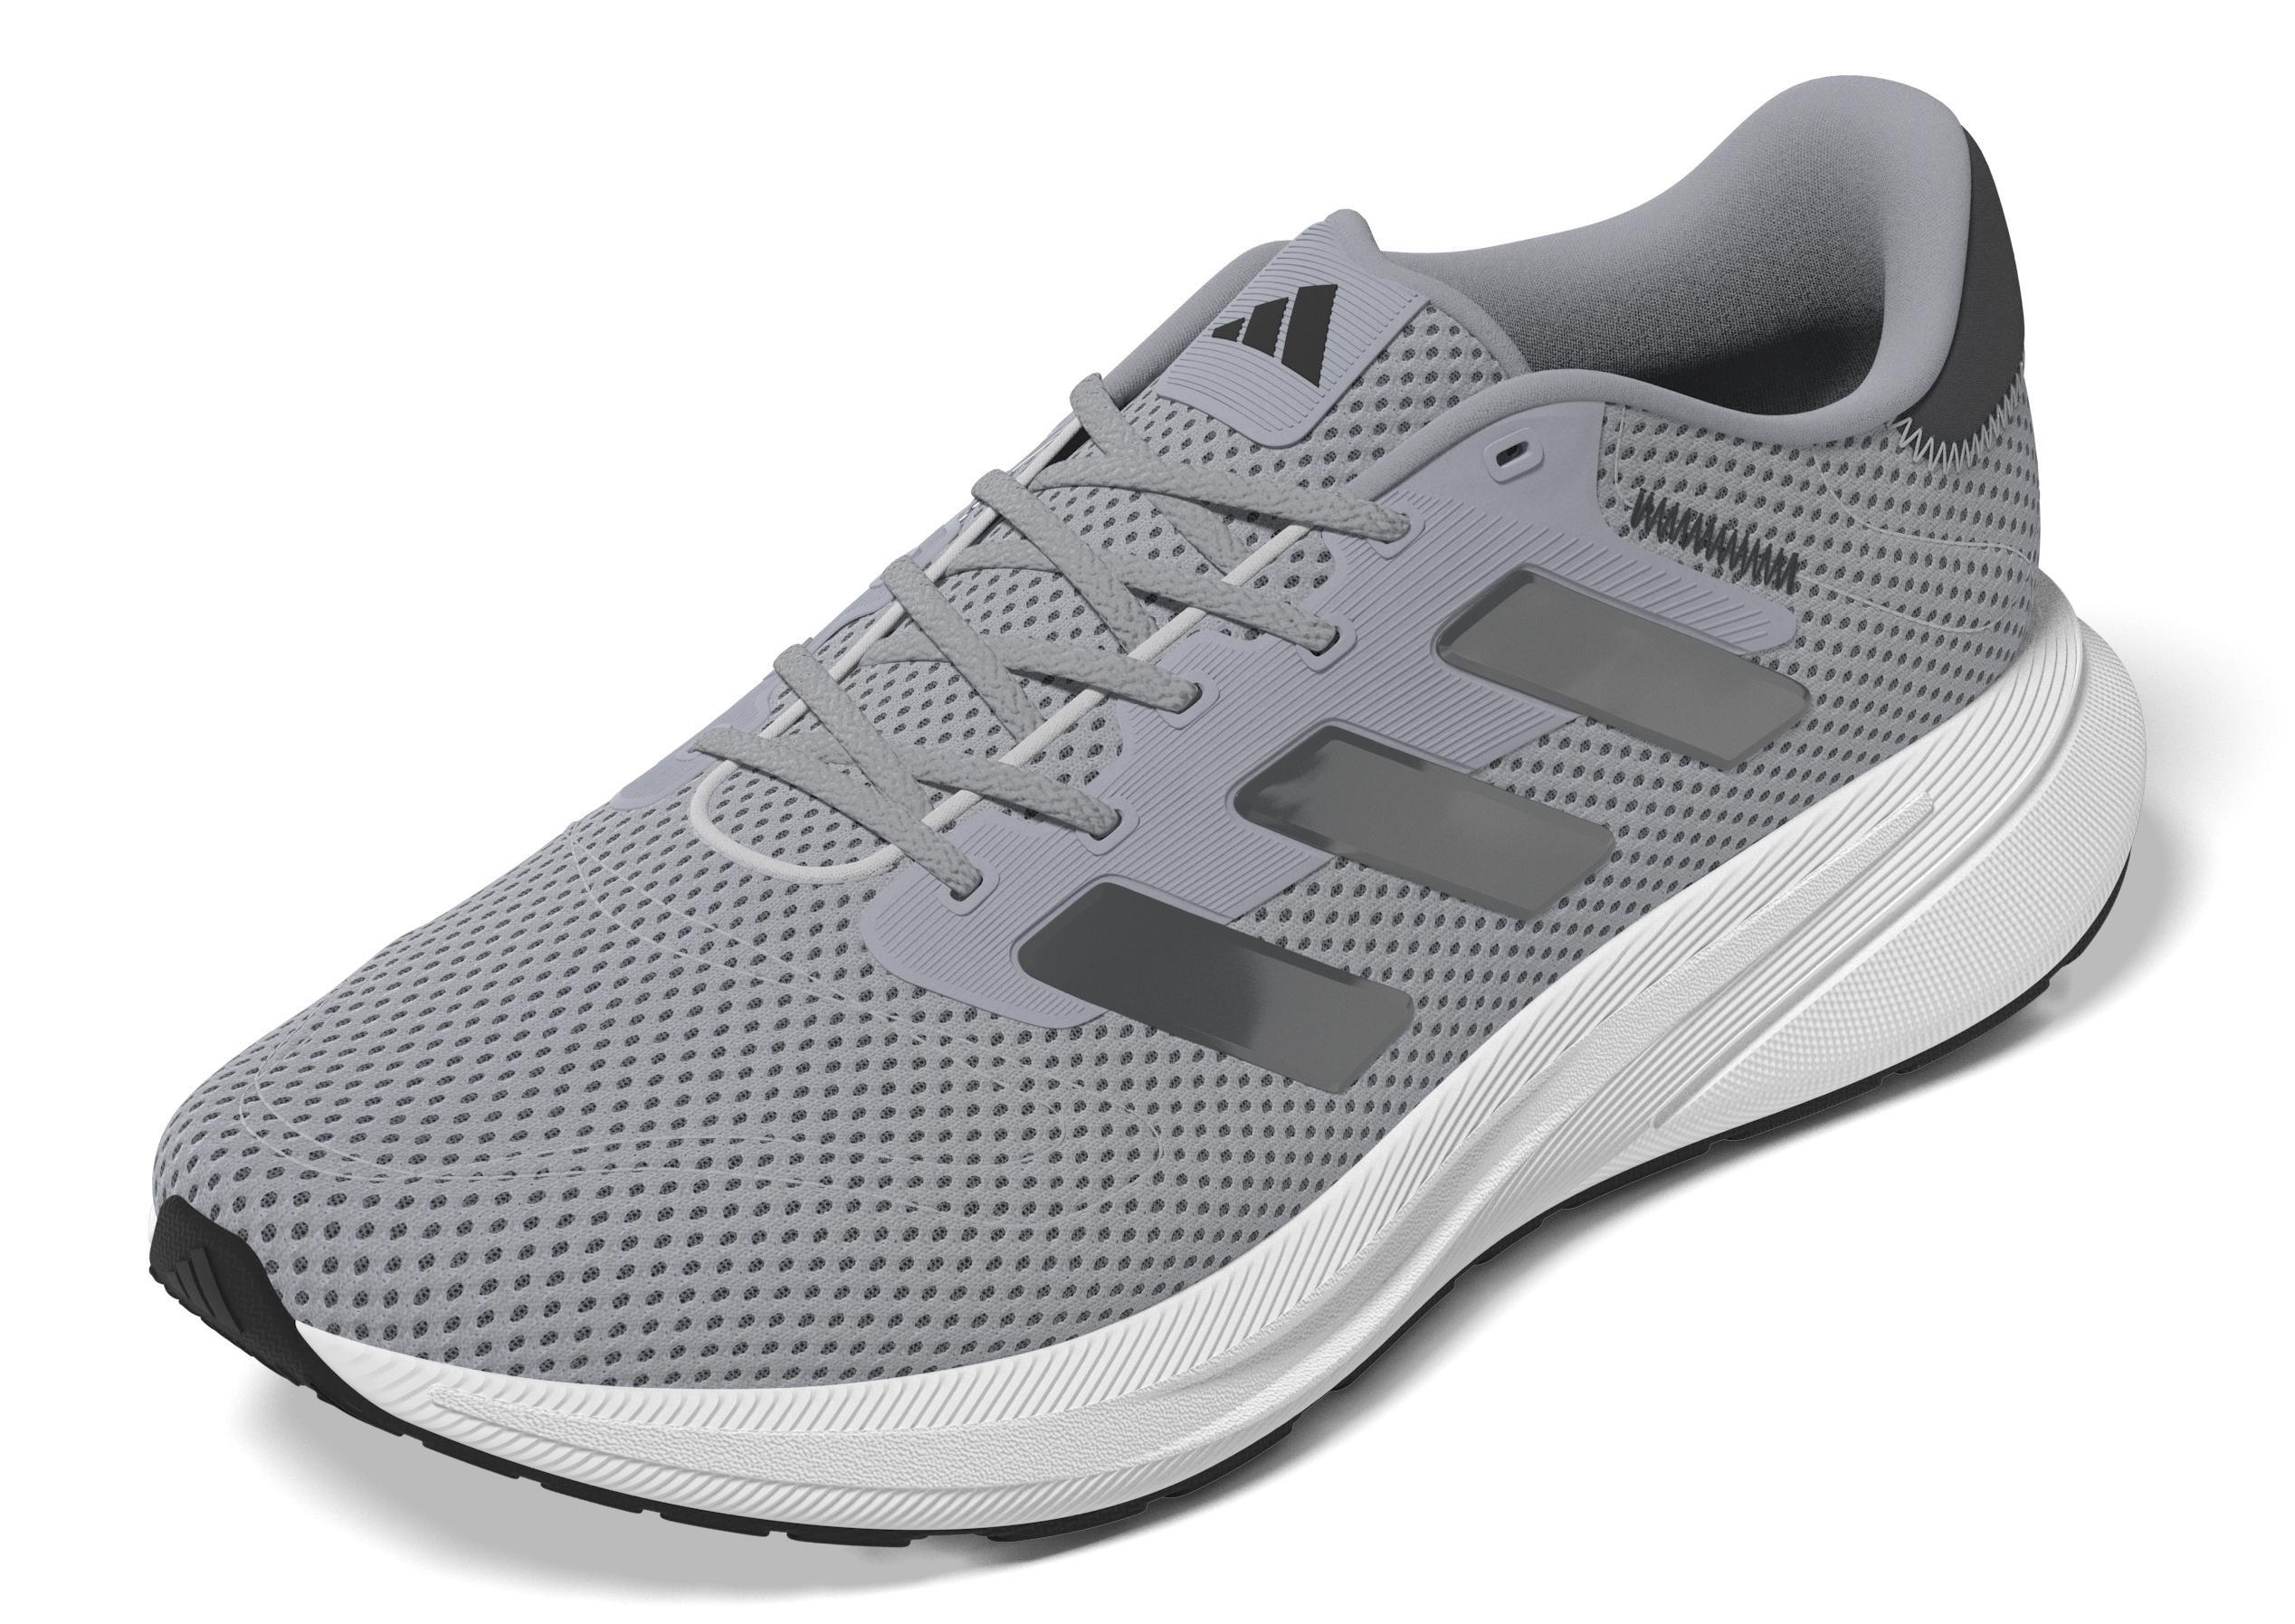 adidas - Unisex Response Runner Shoes, Silver